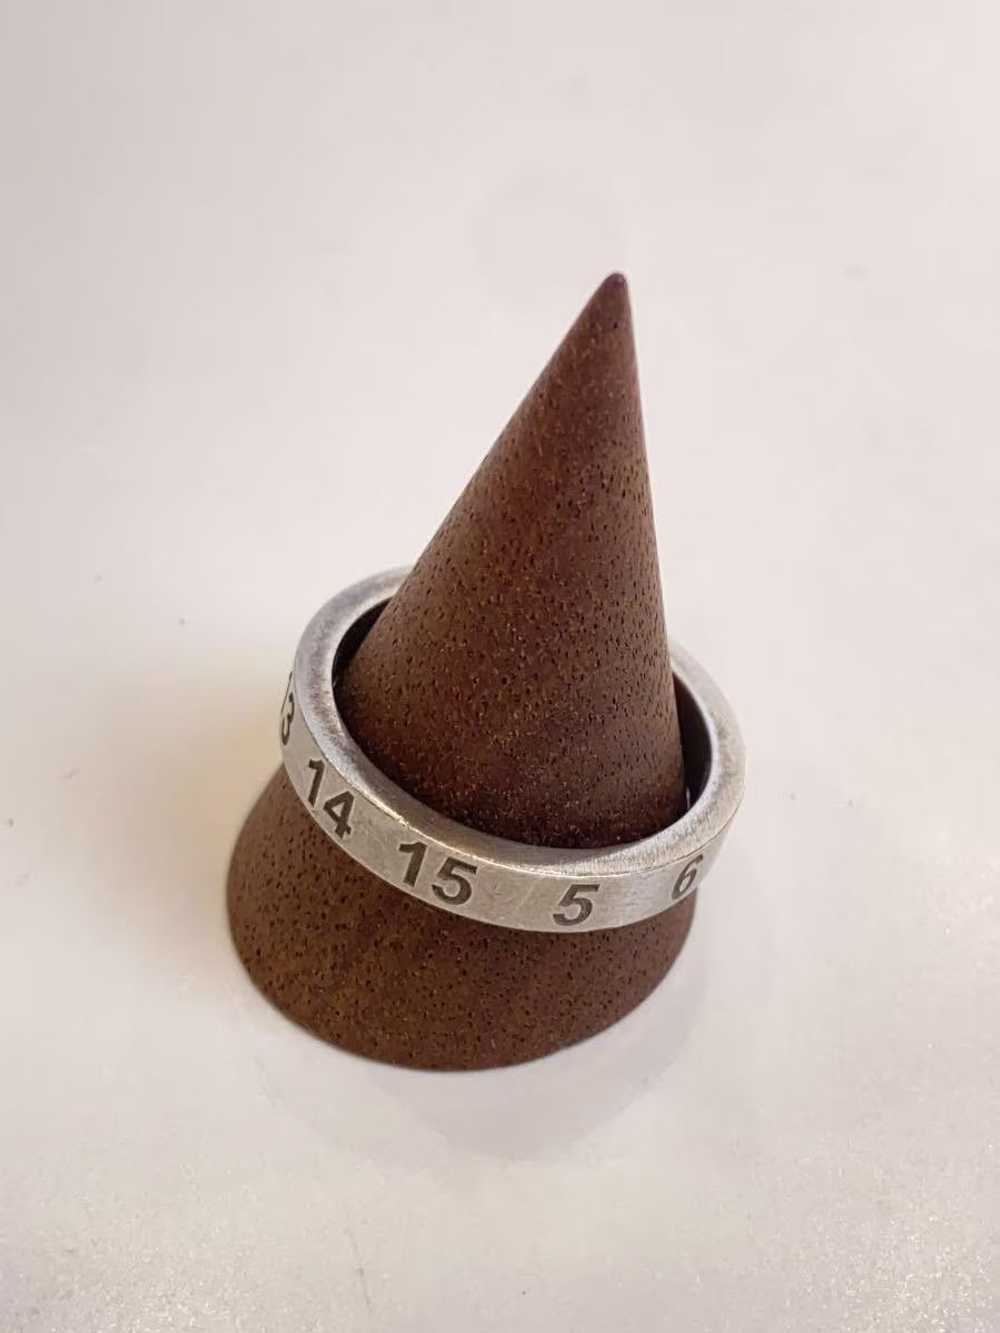 Maison Margiela .925 Silver Numbers Ring - image 2